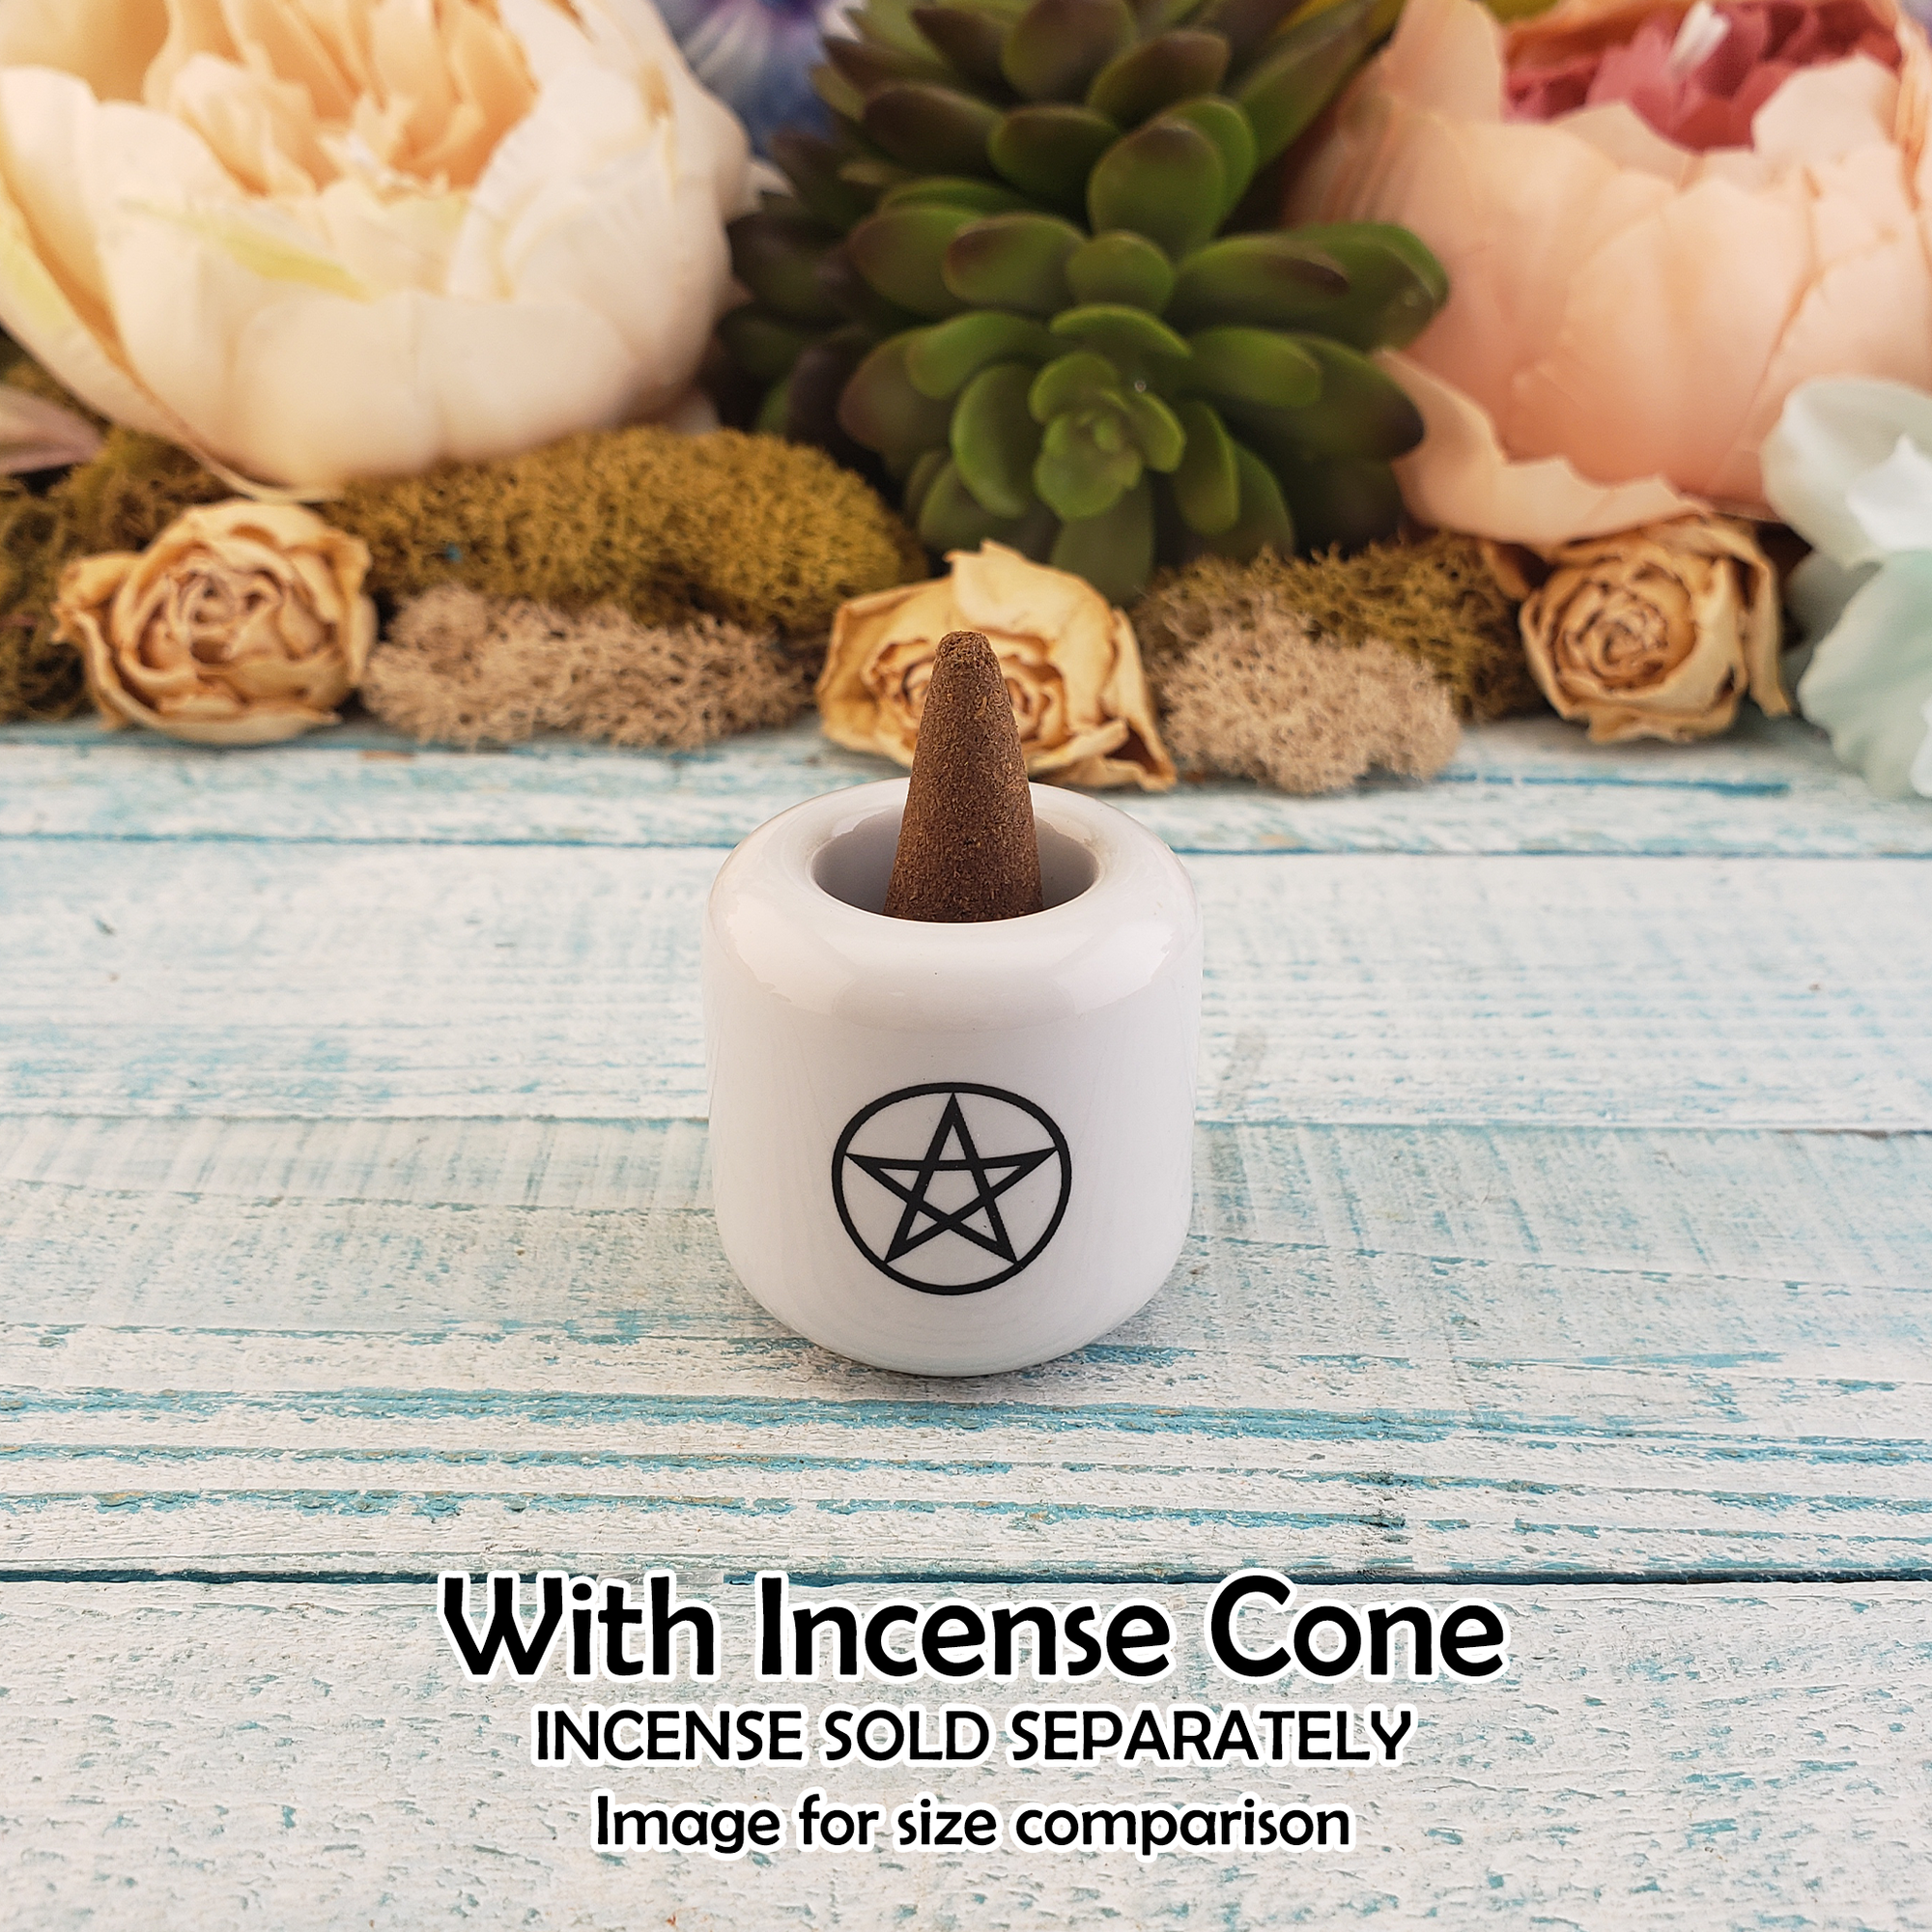 White Pentacle Ceramic Sphere Stand - Chime Candle Holder - Incense Holder - with Incense Cone for Size Comparison